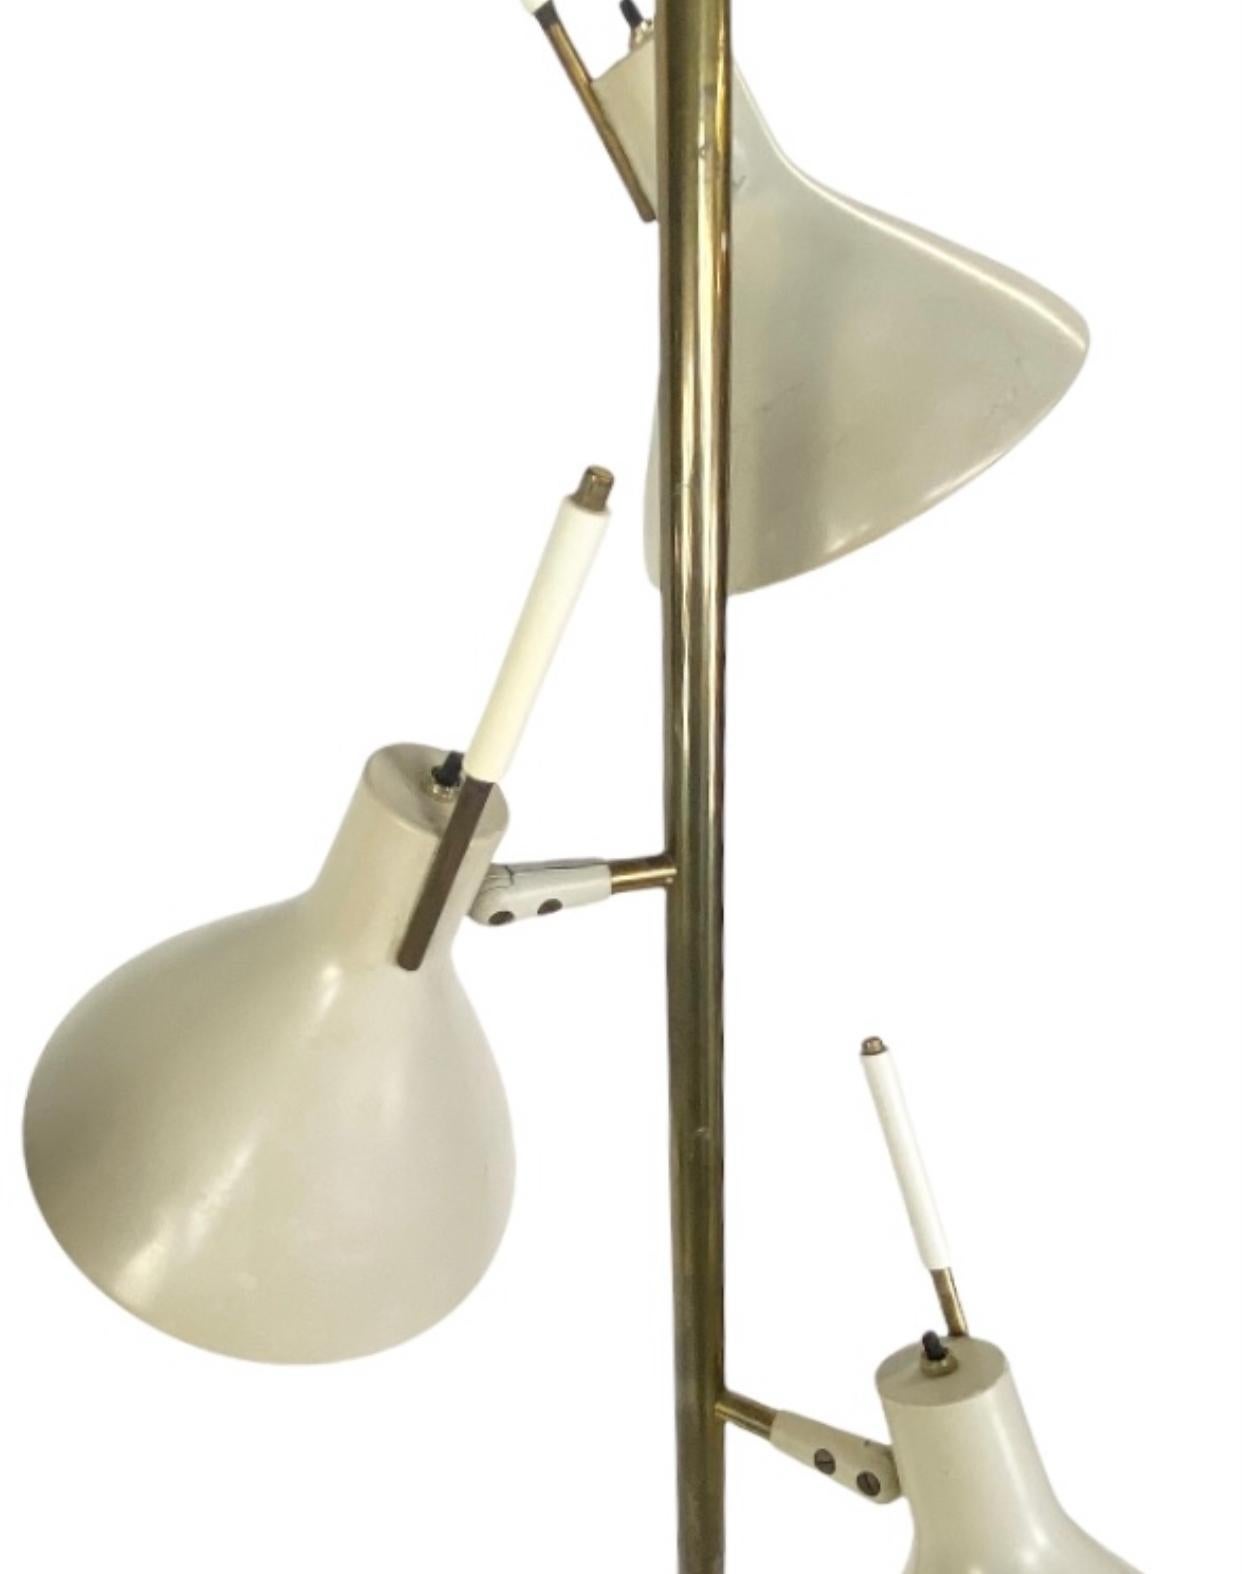 American Pair of Lightolier Floor Lamps with Pivoting Shades designed by Thomas Moser